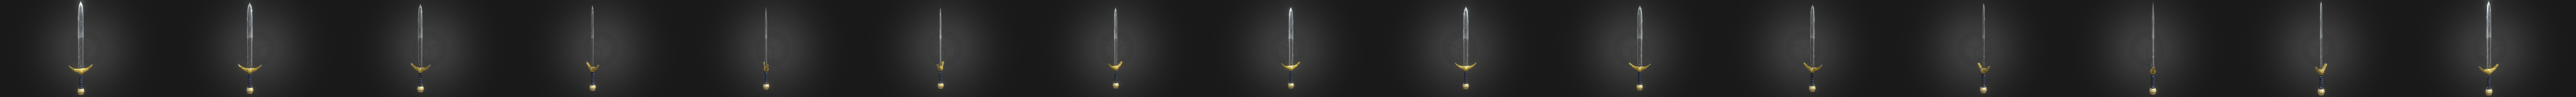 Roblox Linked Sword Remaster Download Free 3d Model By Sir Numb Sirnumb 0326504 - roblox the old sword